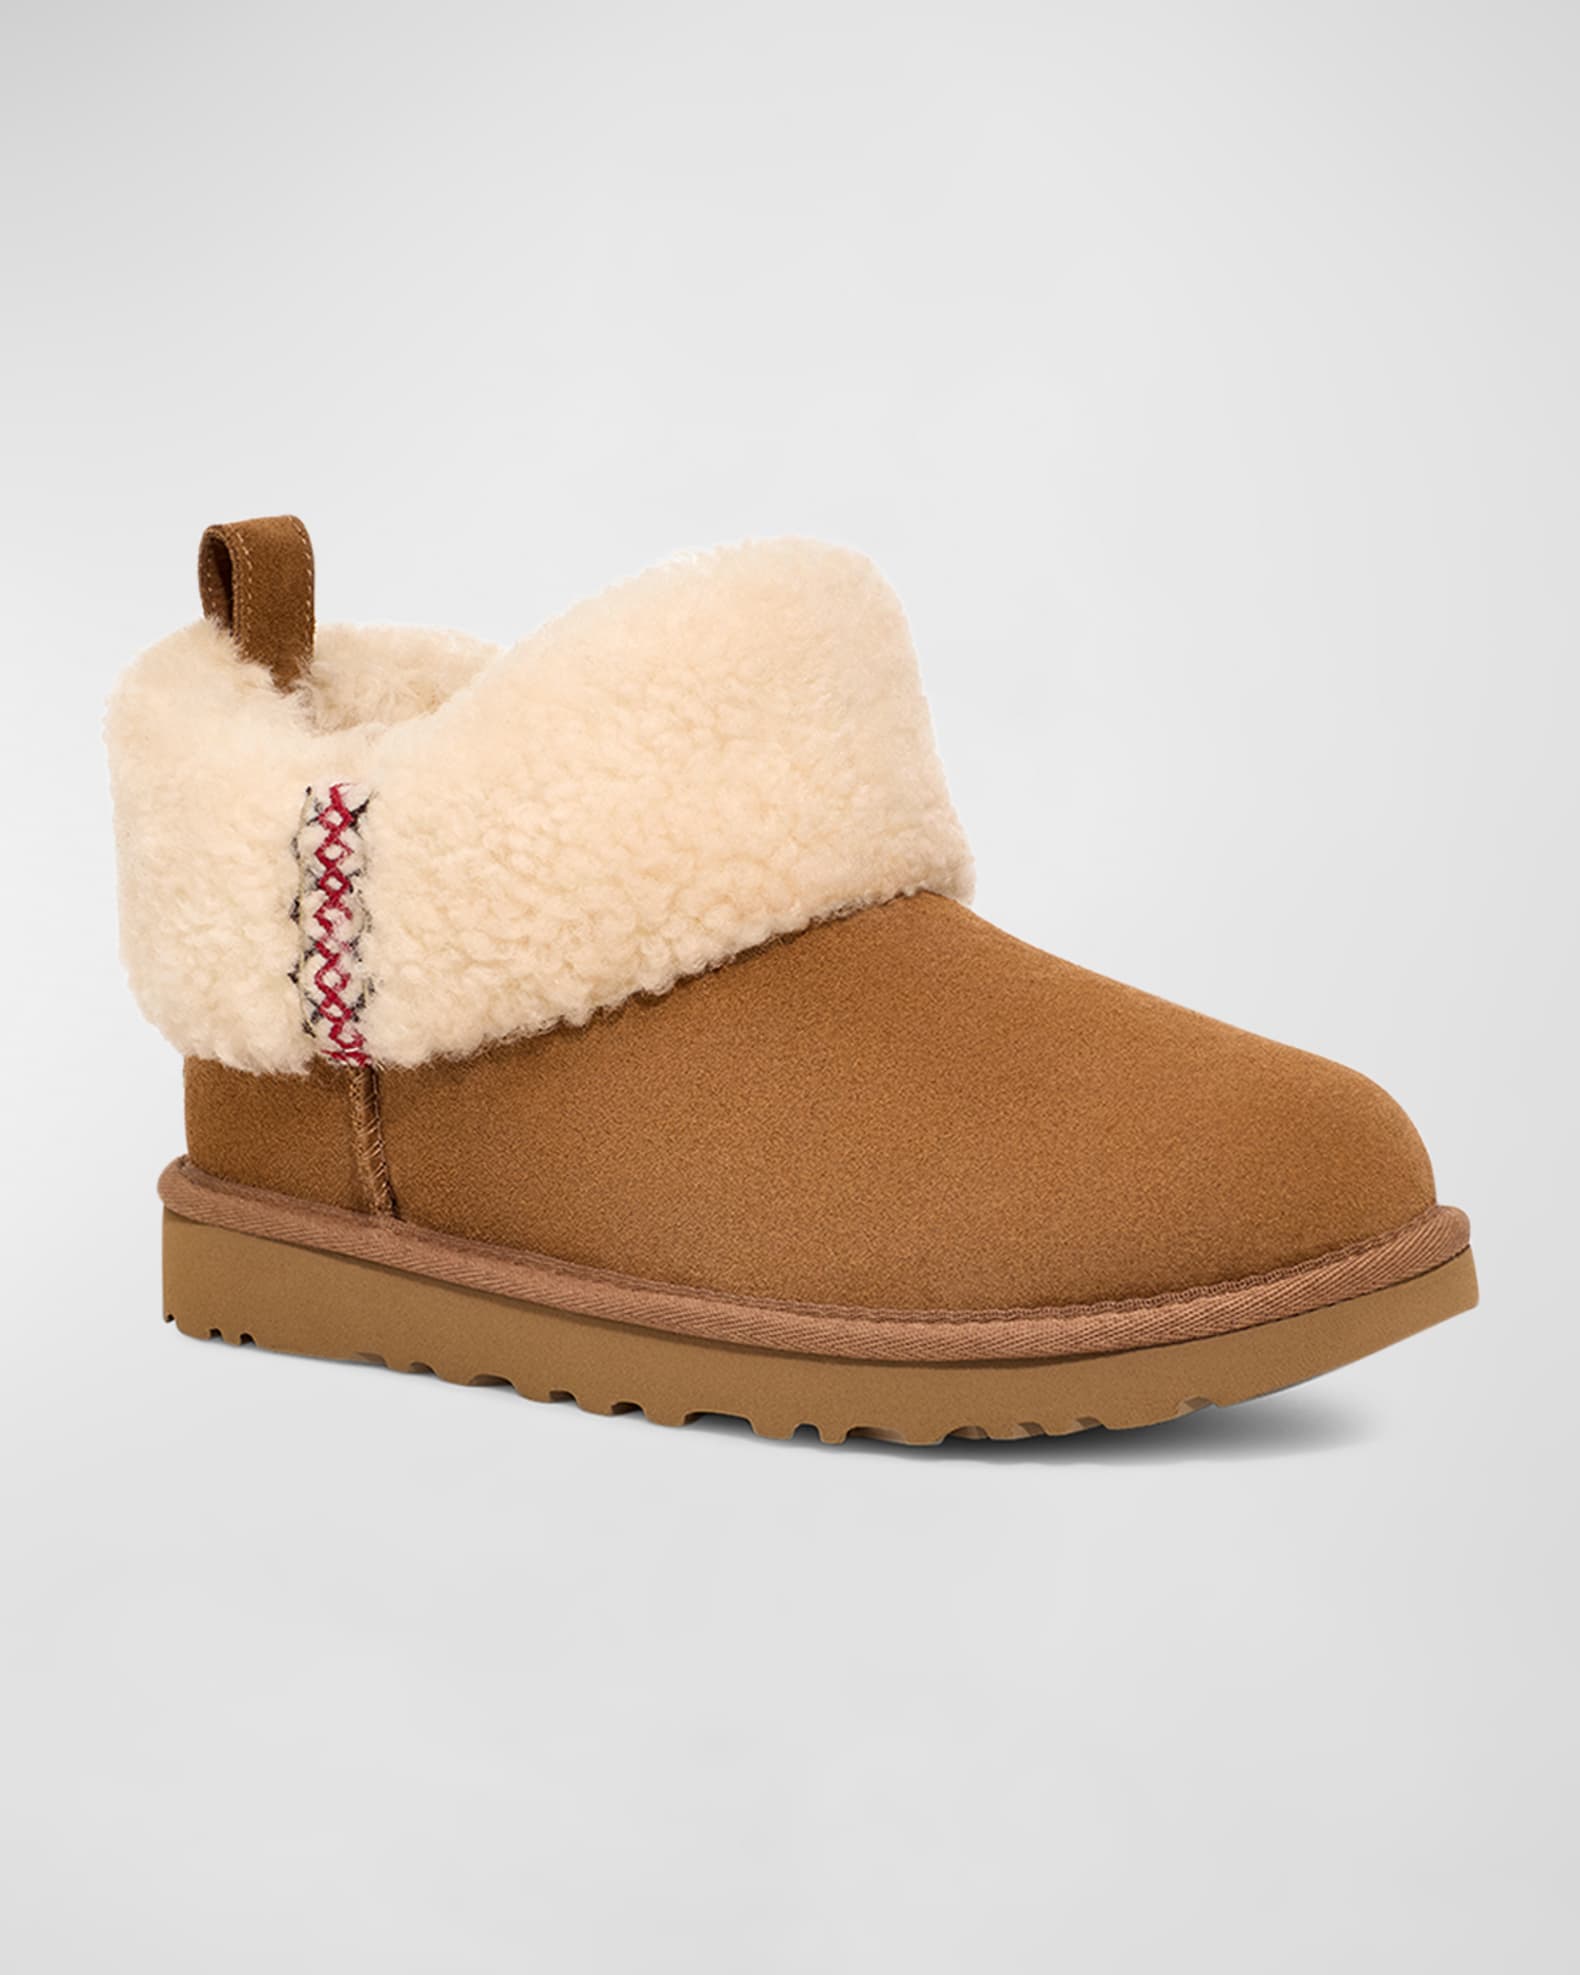 Gucci Uggs  Uggs, Ugg boots, Shoe boots